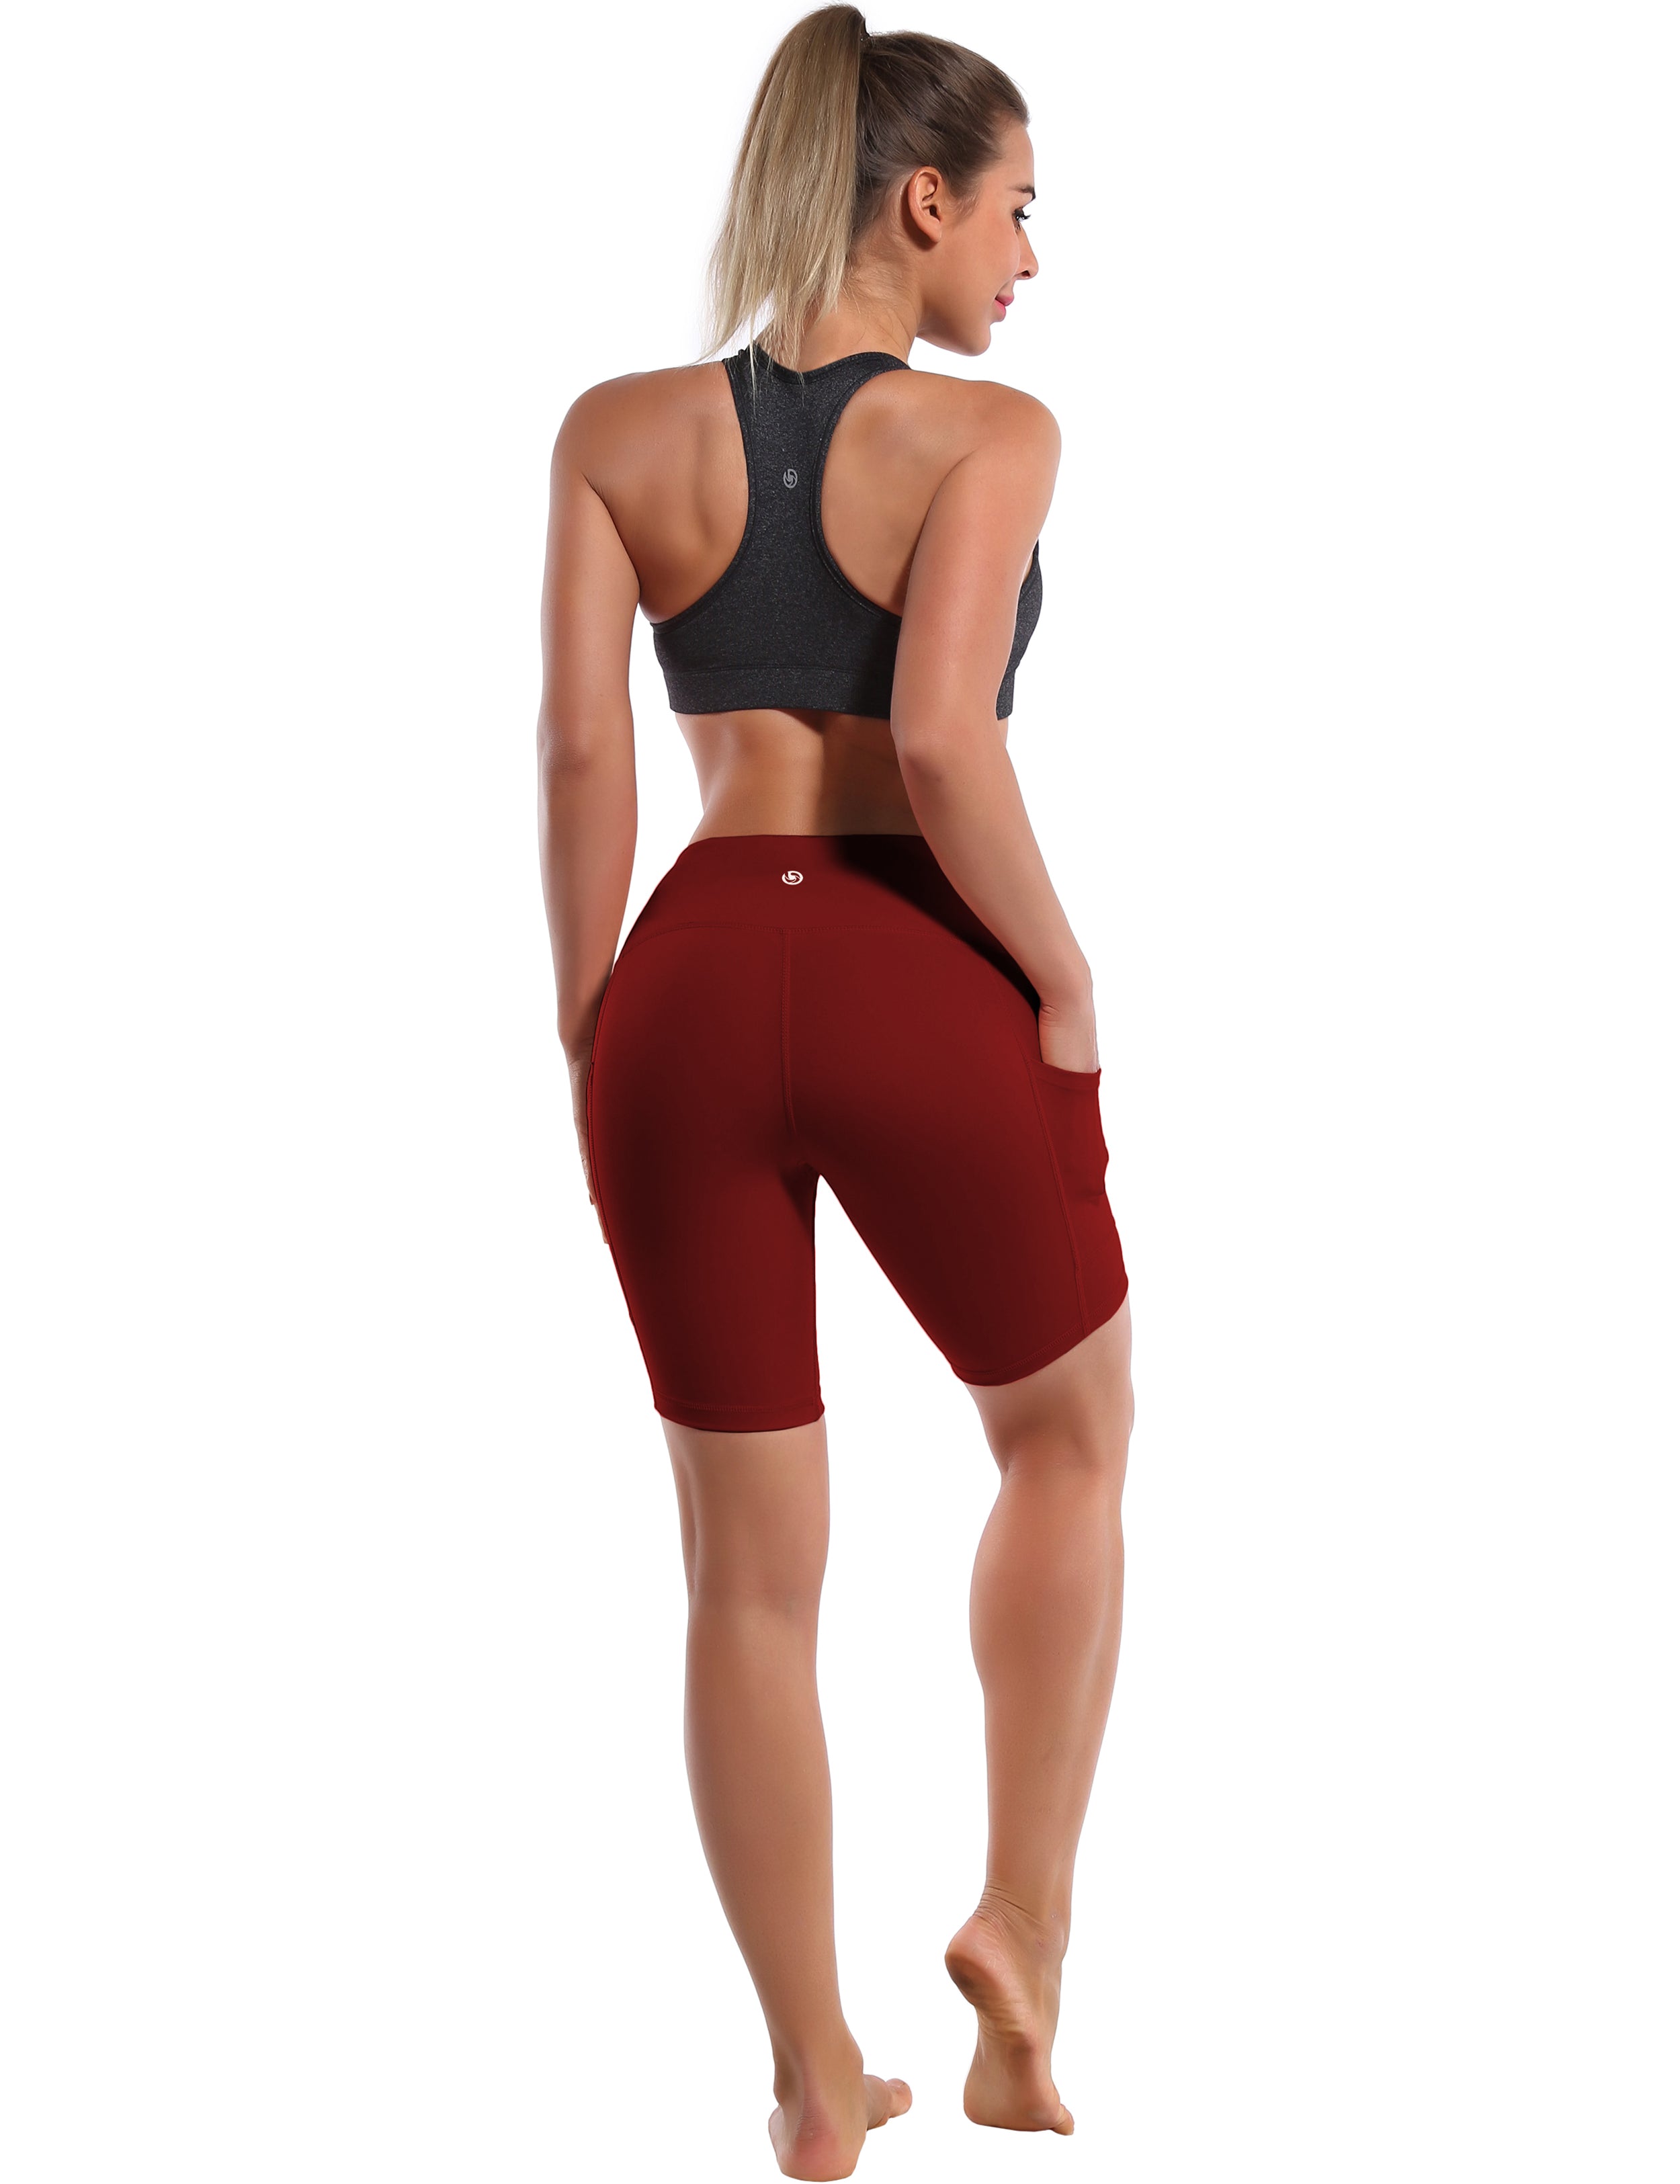 8" Side Pockets Yoga Shorts cherryred Sleek, soft, smooth and totally comfortable: our newest style is here. Softest-ever fabric High elasticity High density 4-way stretch Fabric doesn't attract lint easily No see-through Moisture-wicking Machine wash 75% Nylon, 25% Spandex